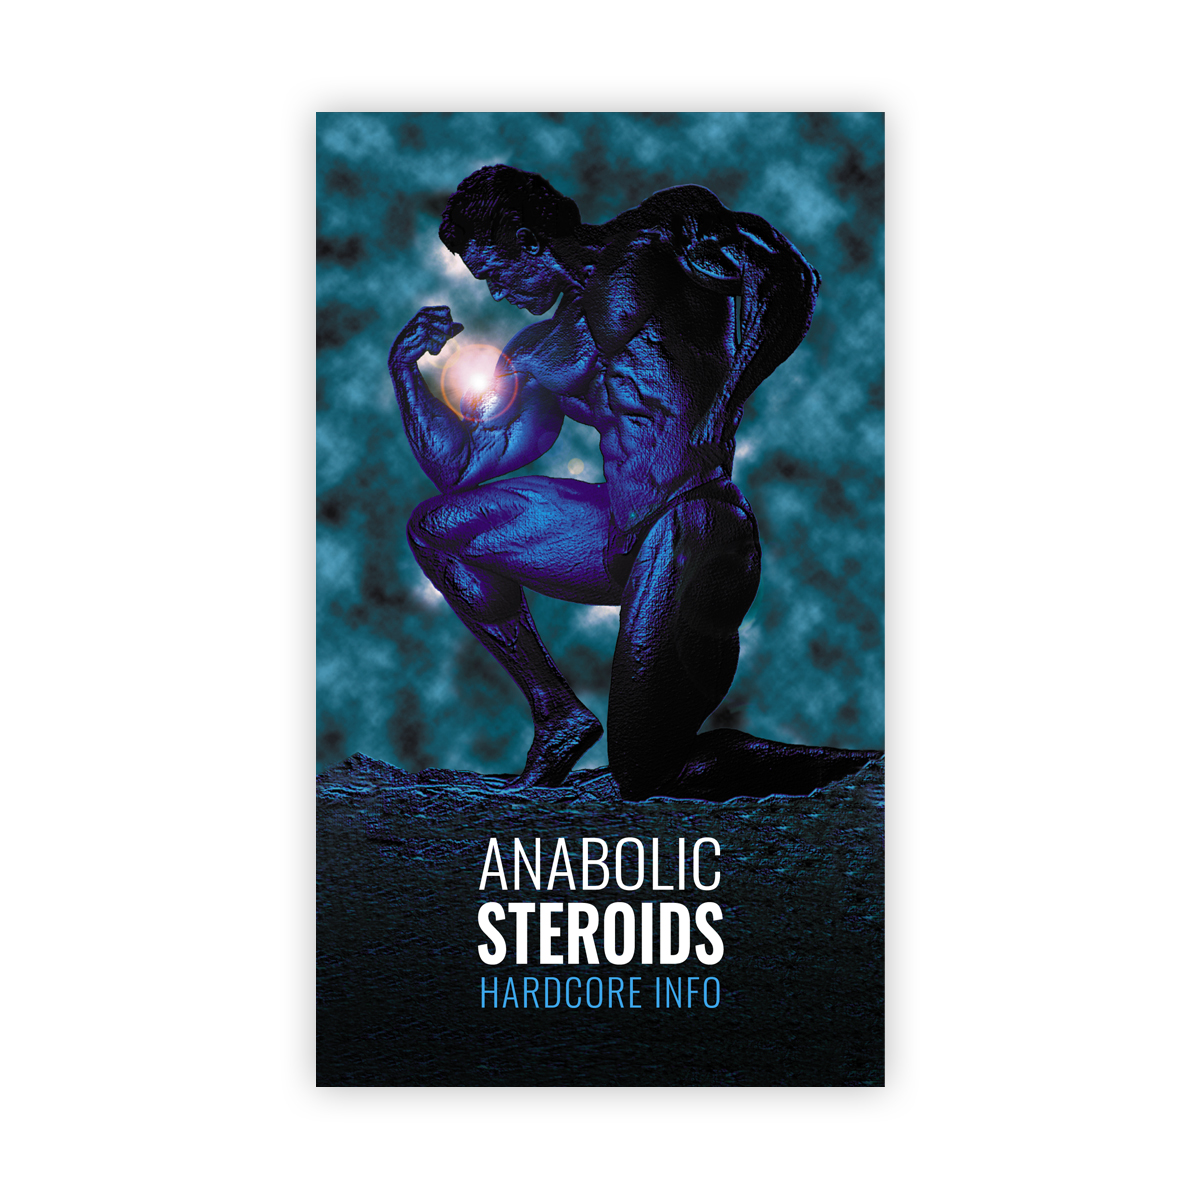 Anabolic Steroids hardcore info (3rd edition) 